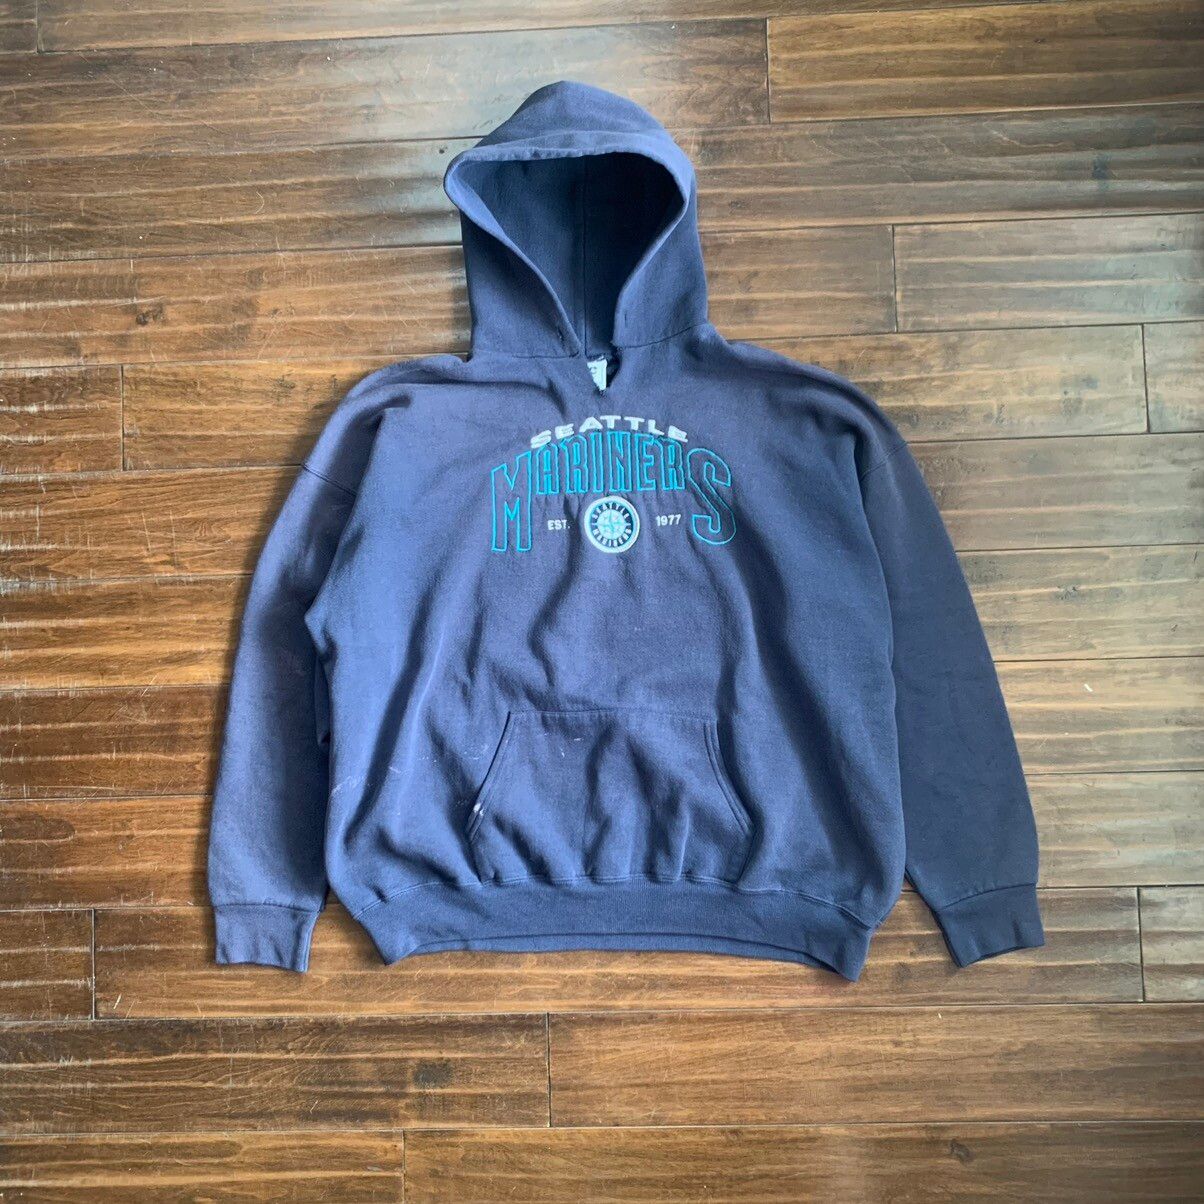 Vintage 1990s Seattle Mariners heavyweight boxy hoodie Size US XL / EU 56 / 4 - 1 Preview